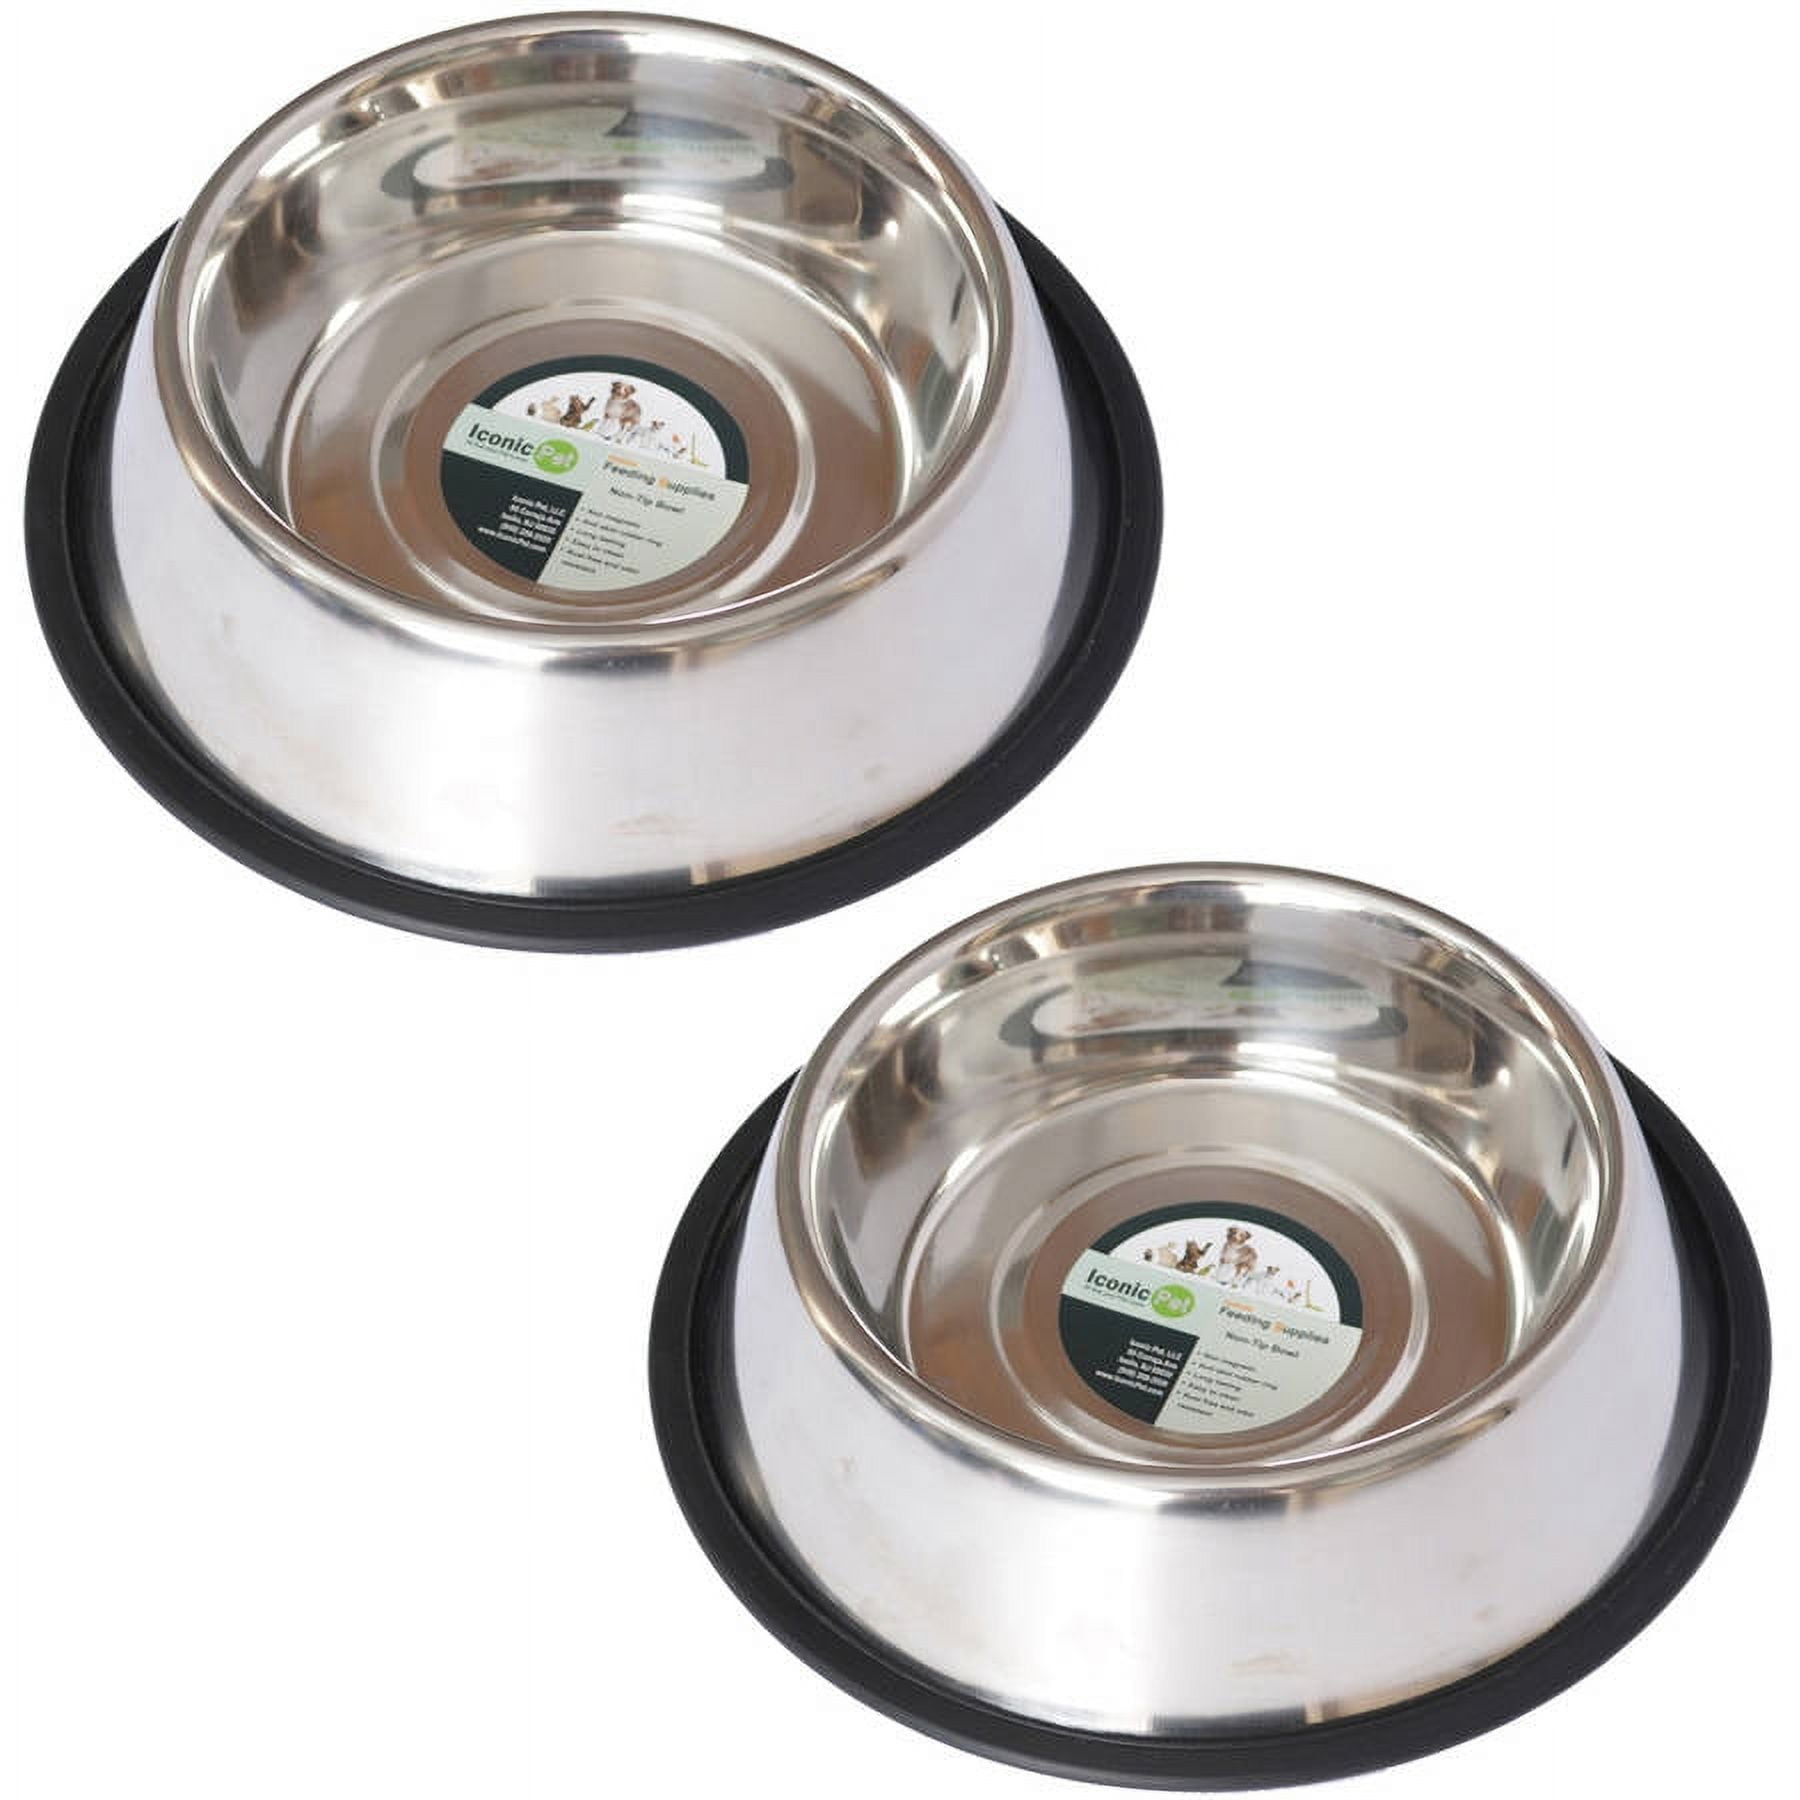 Iconic Pet 51411 8 Oz Stainless Steel Non-skid Pet Bowl For Dog Or Cat - Pack Of 2